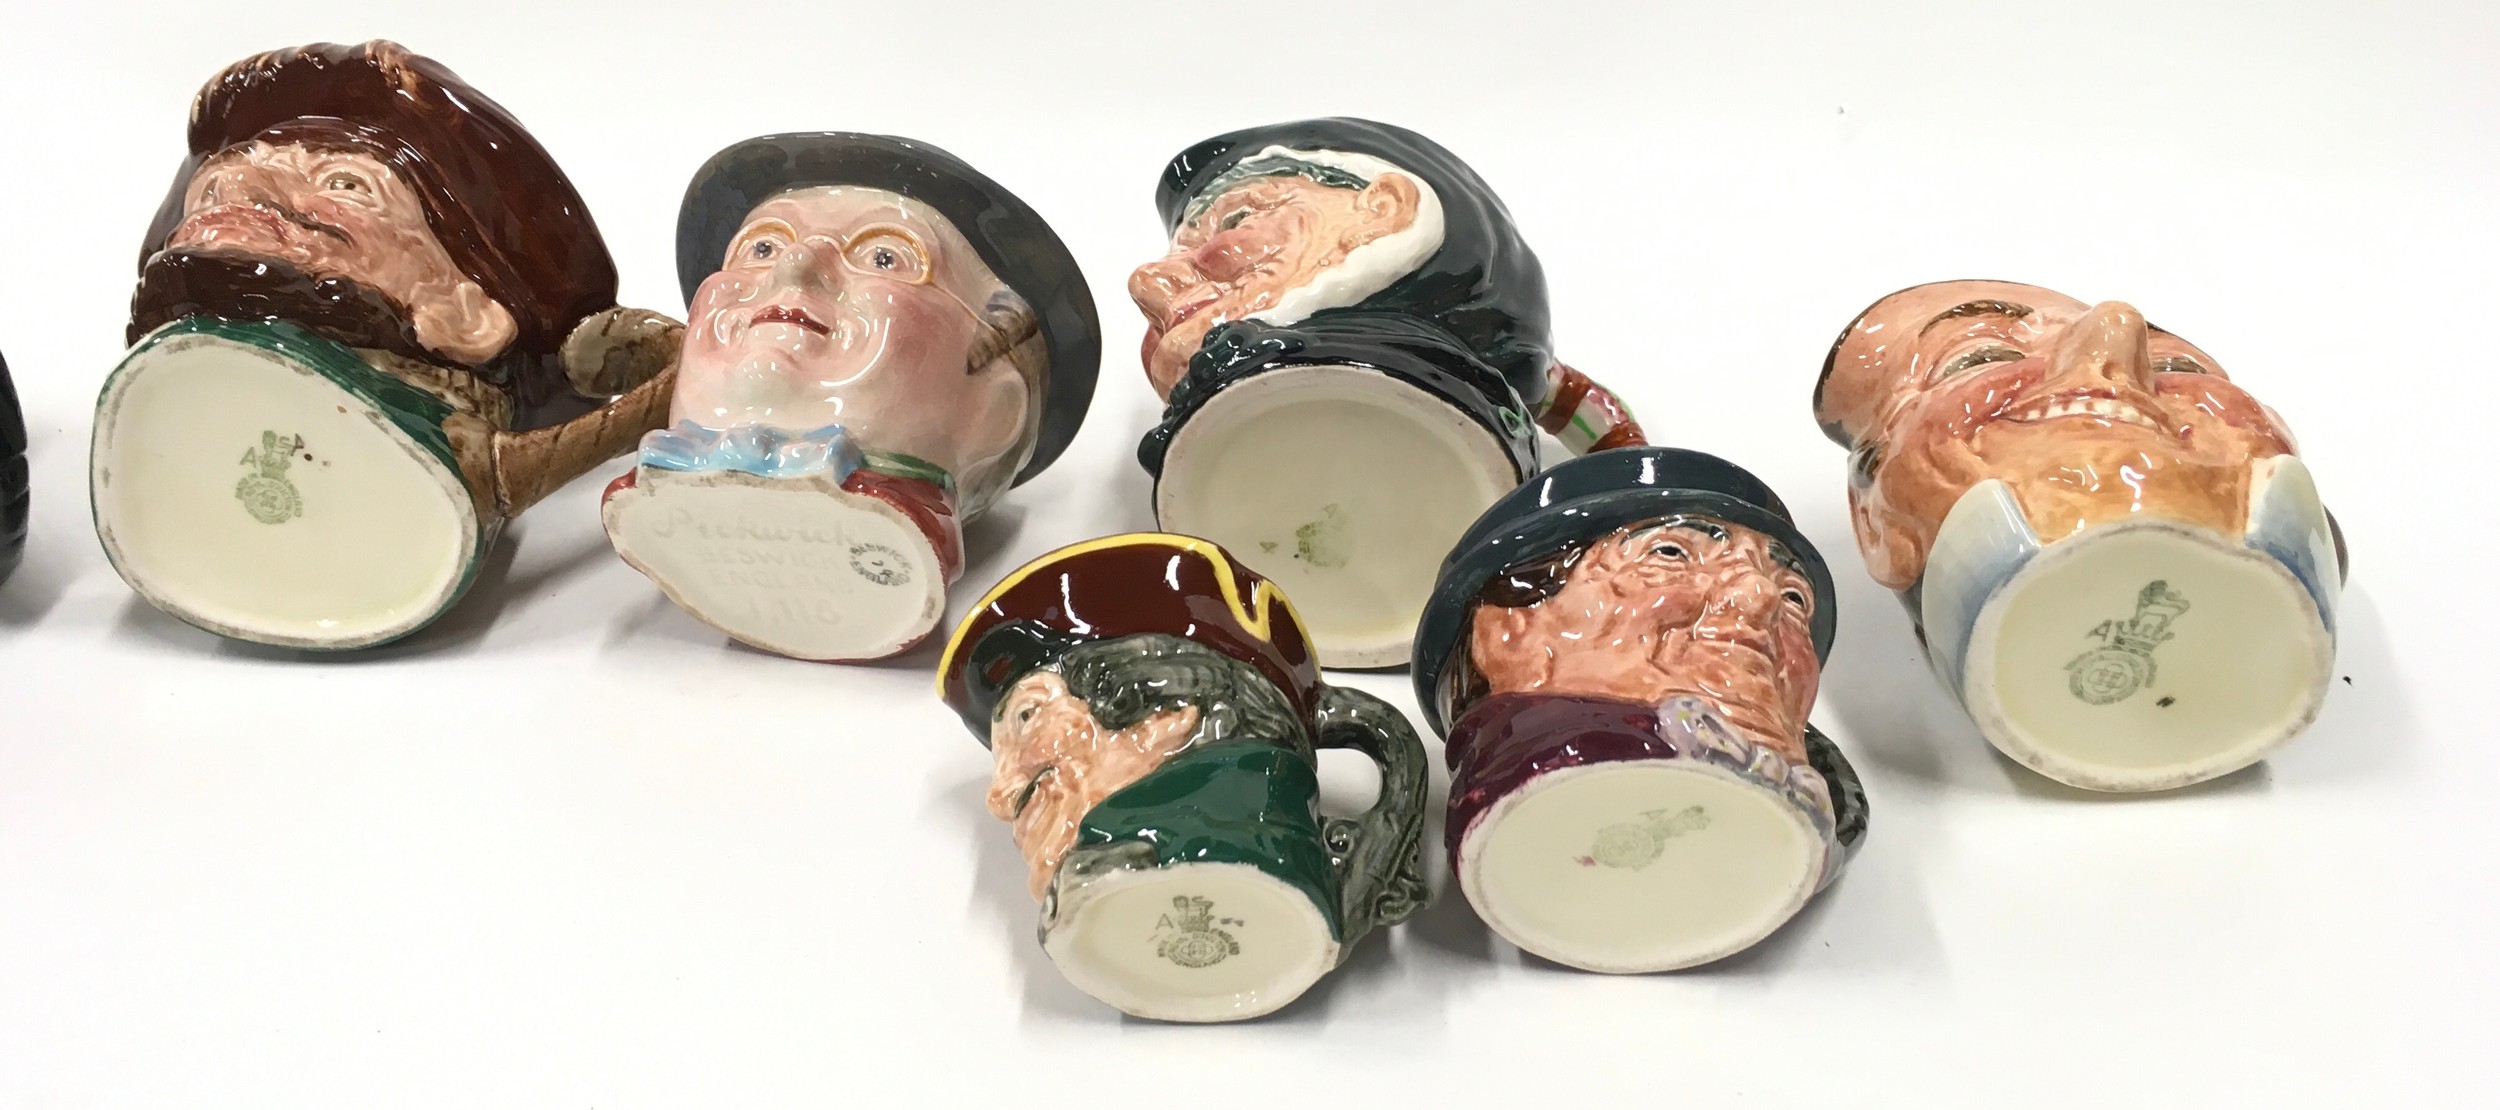 Eleven toby character jugs with examples by Royal Doulton and Beswick. - Image 4 of 5